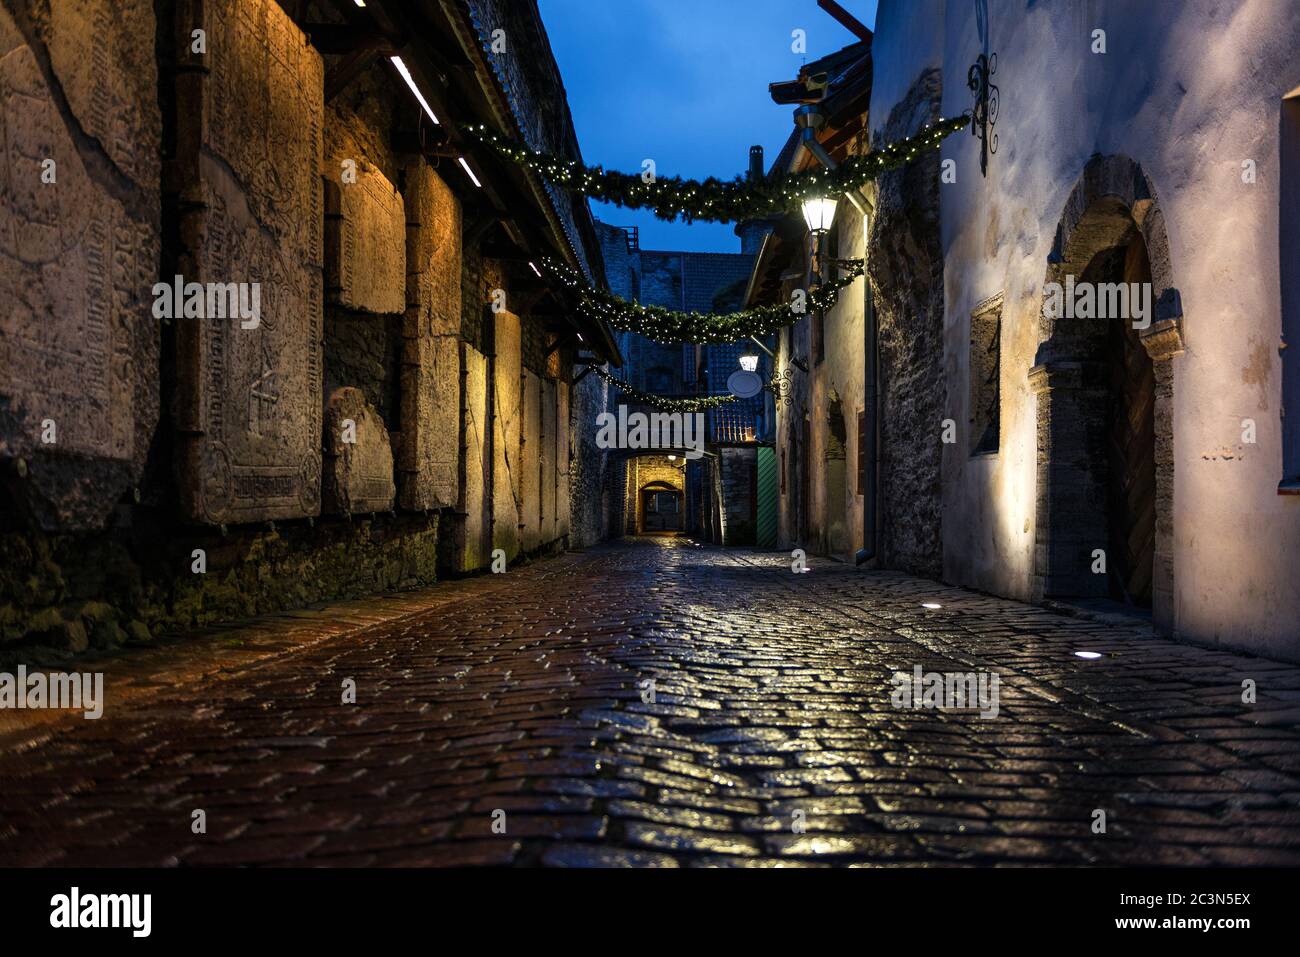 Night view of St. Catherine’s Passage in Tallinn, Estonia, a medieval passage containing some of the old remainings of a Dominican Monastery. Stock Photo